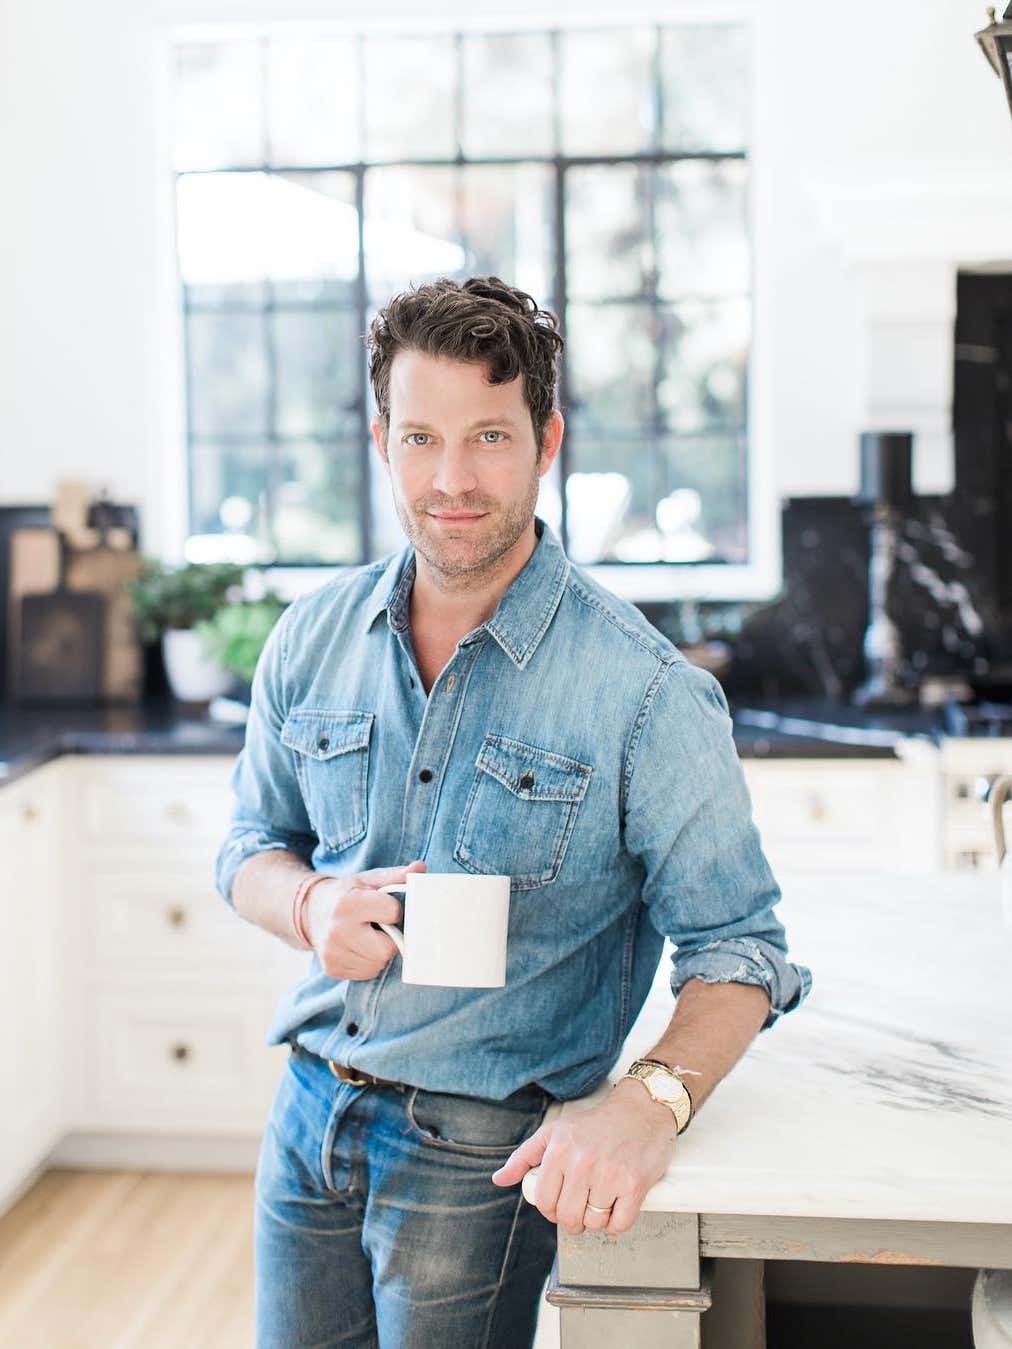 Nate Berkus Can’t Get on Board With This Popular Kitchen Trend